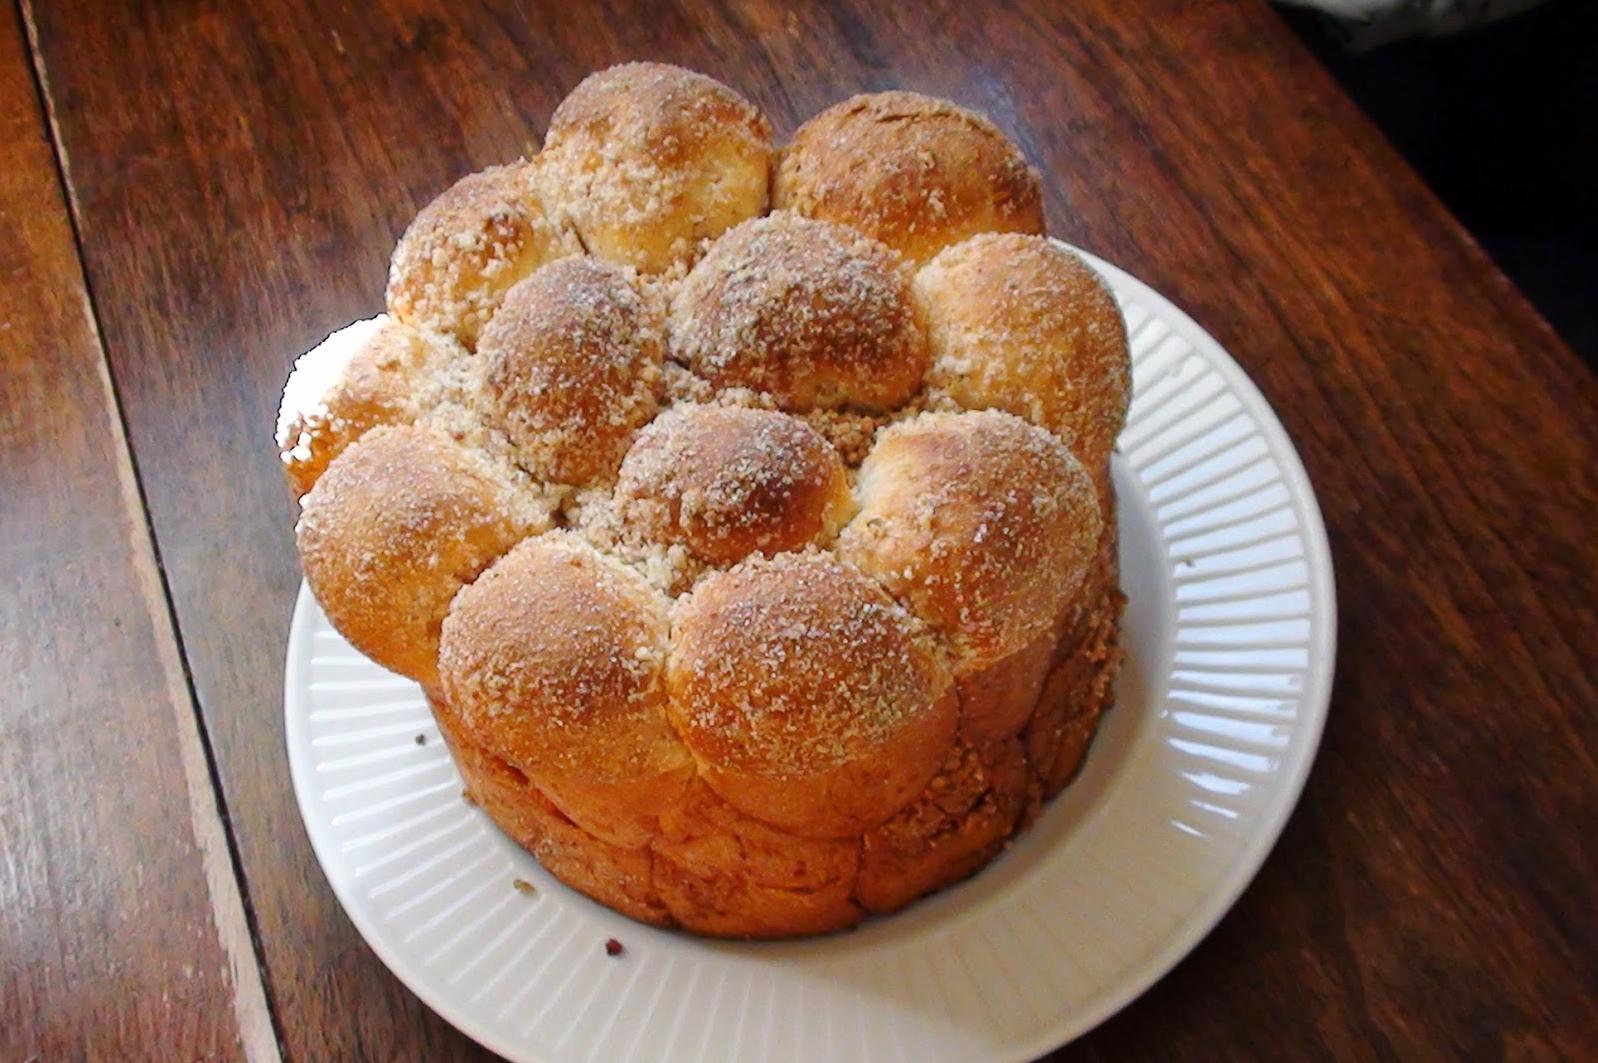  Watch out, this golden dumpling coffee cake is addictively delicious.